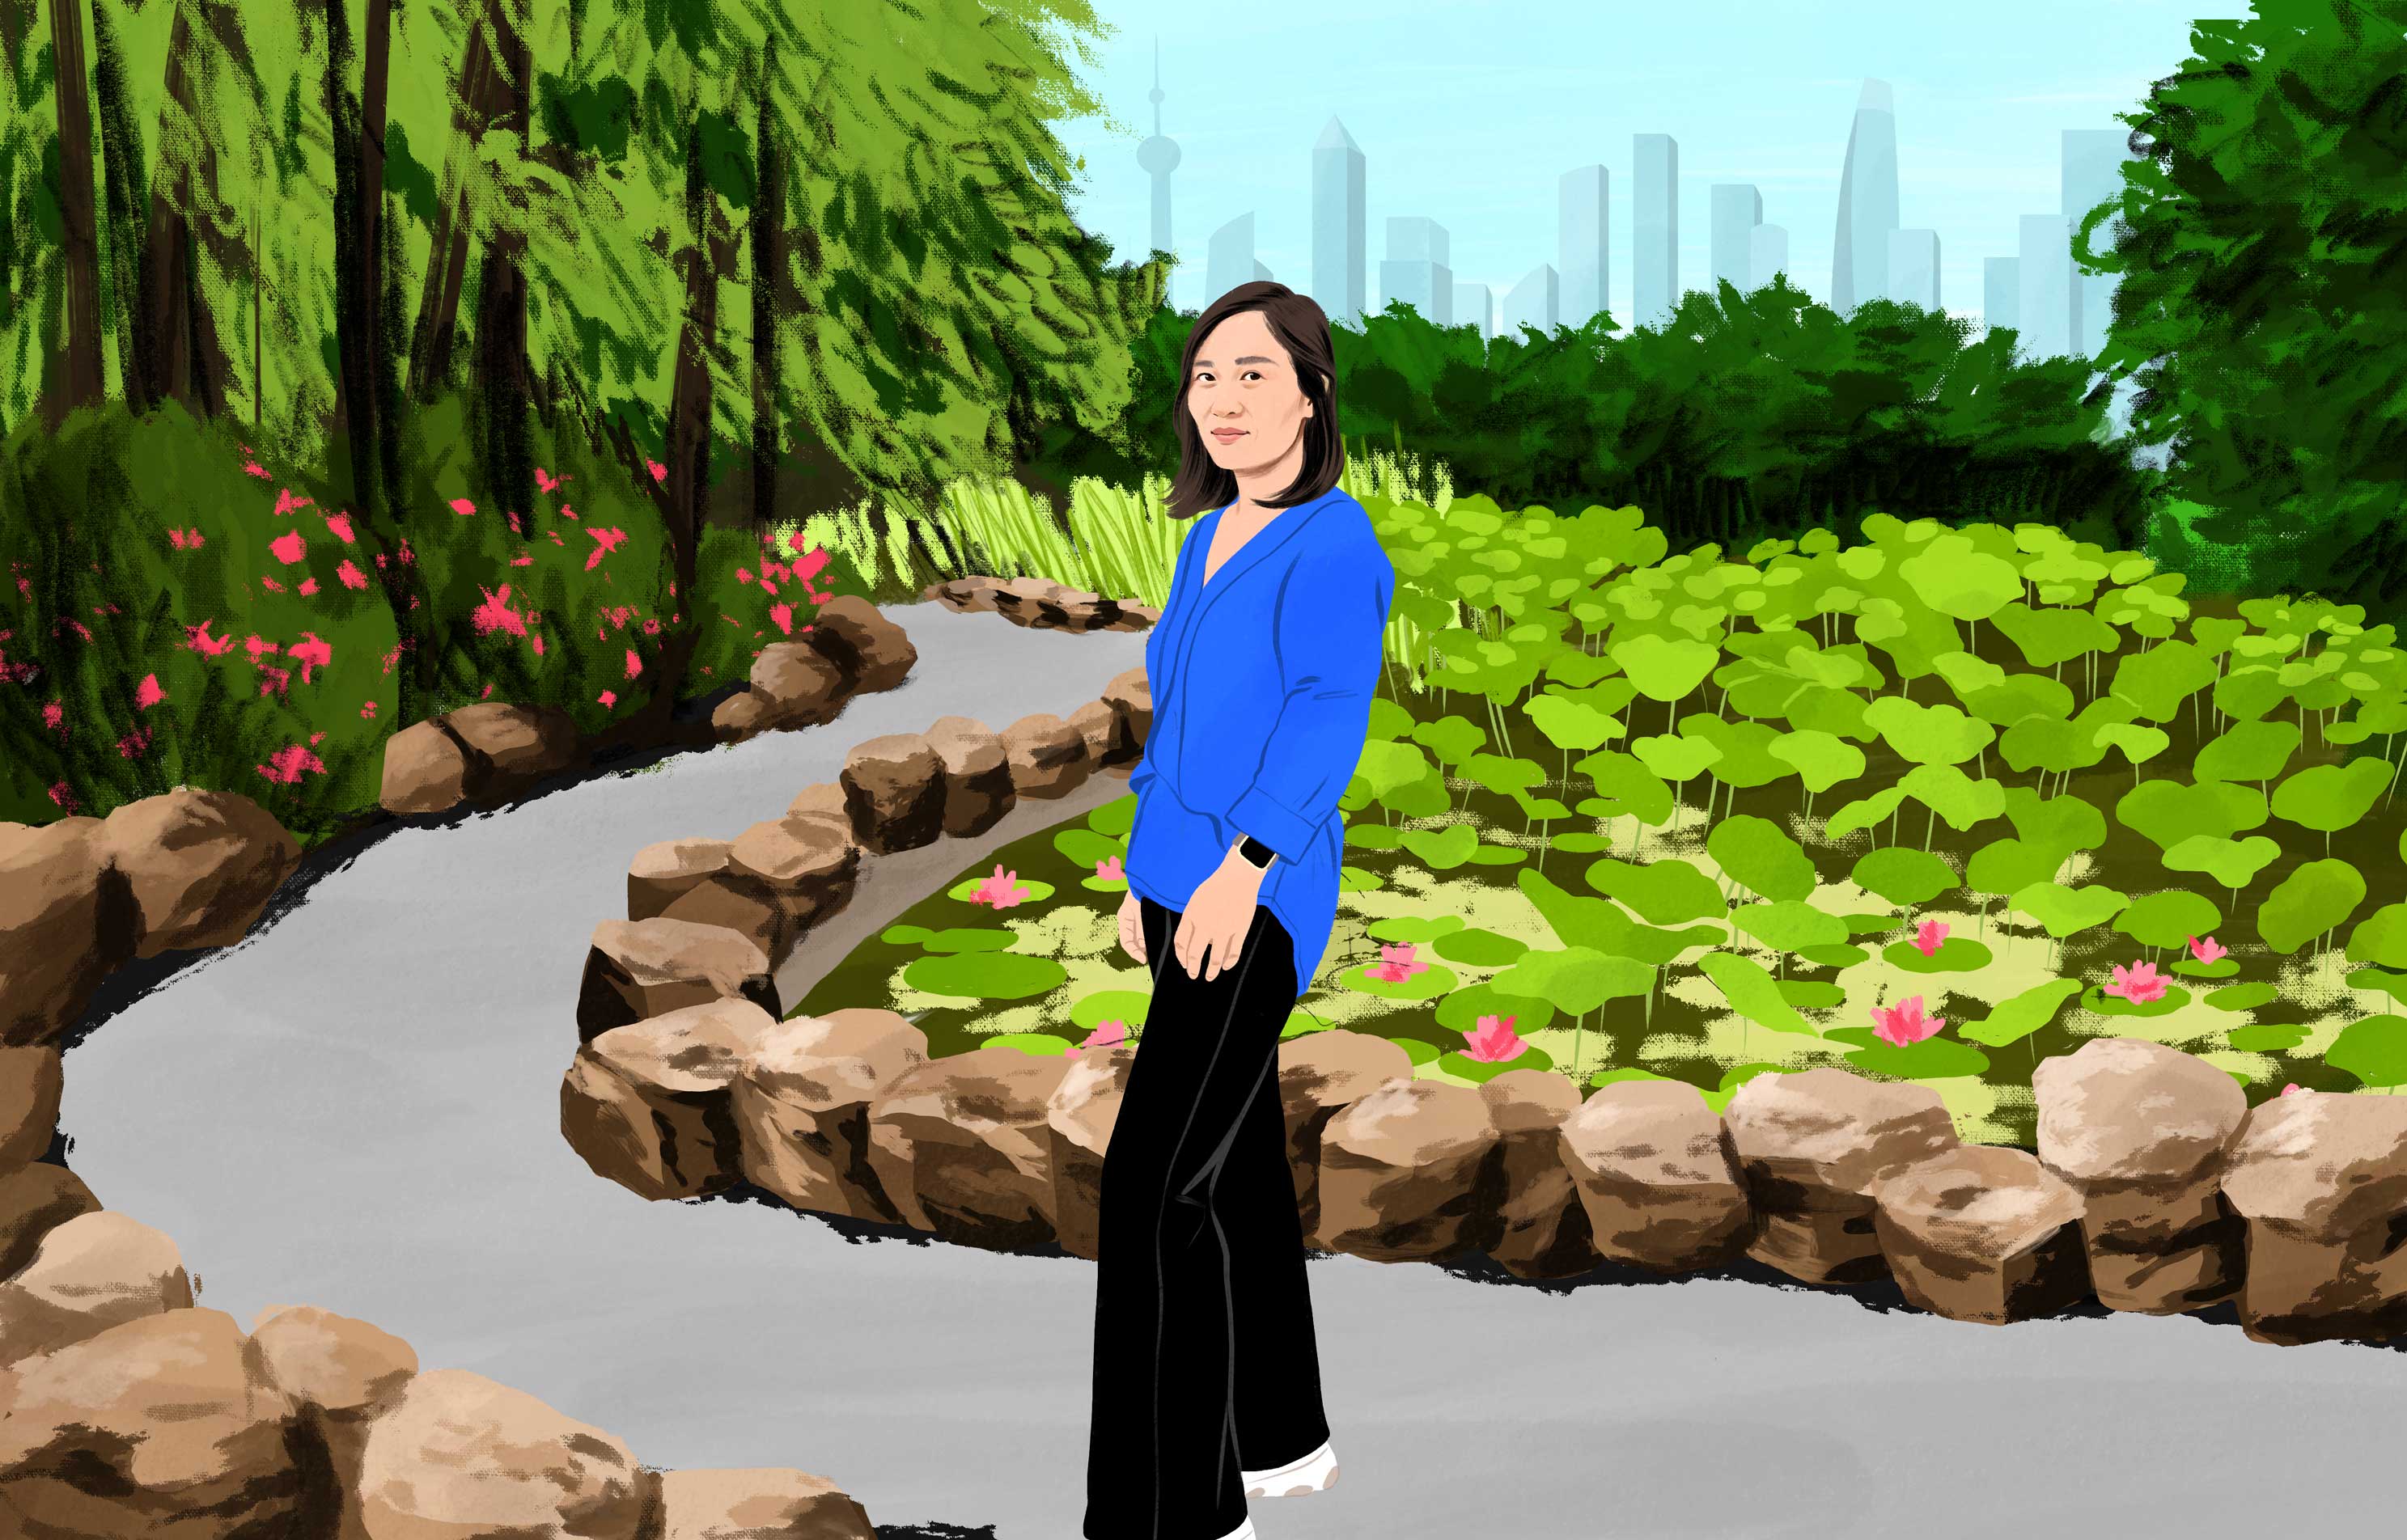 Xu smiles as she walks in a verdant city park with modern skyscrapers in the distant background. 